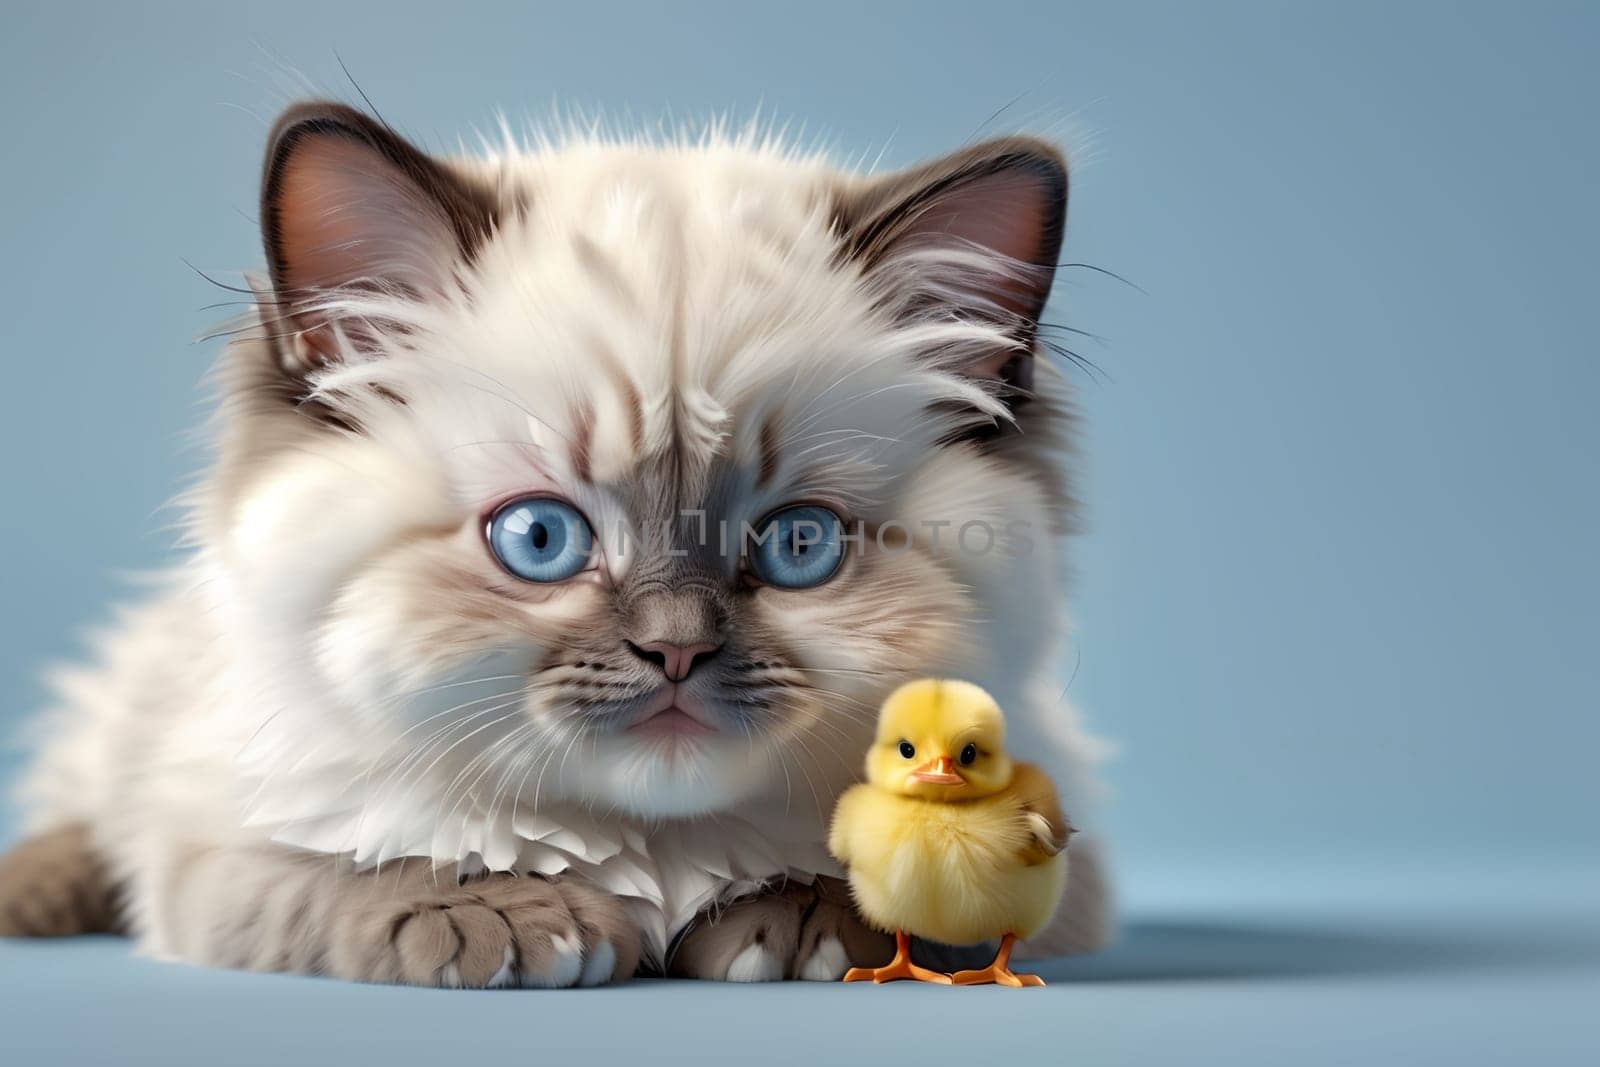 cute kitten and yellow chick, isolated on blue background by Rawlik